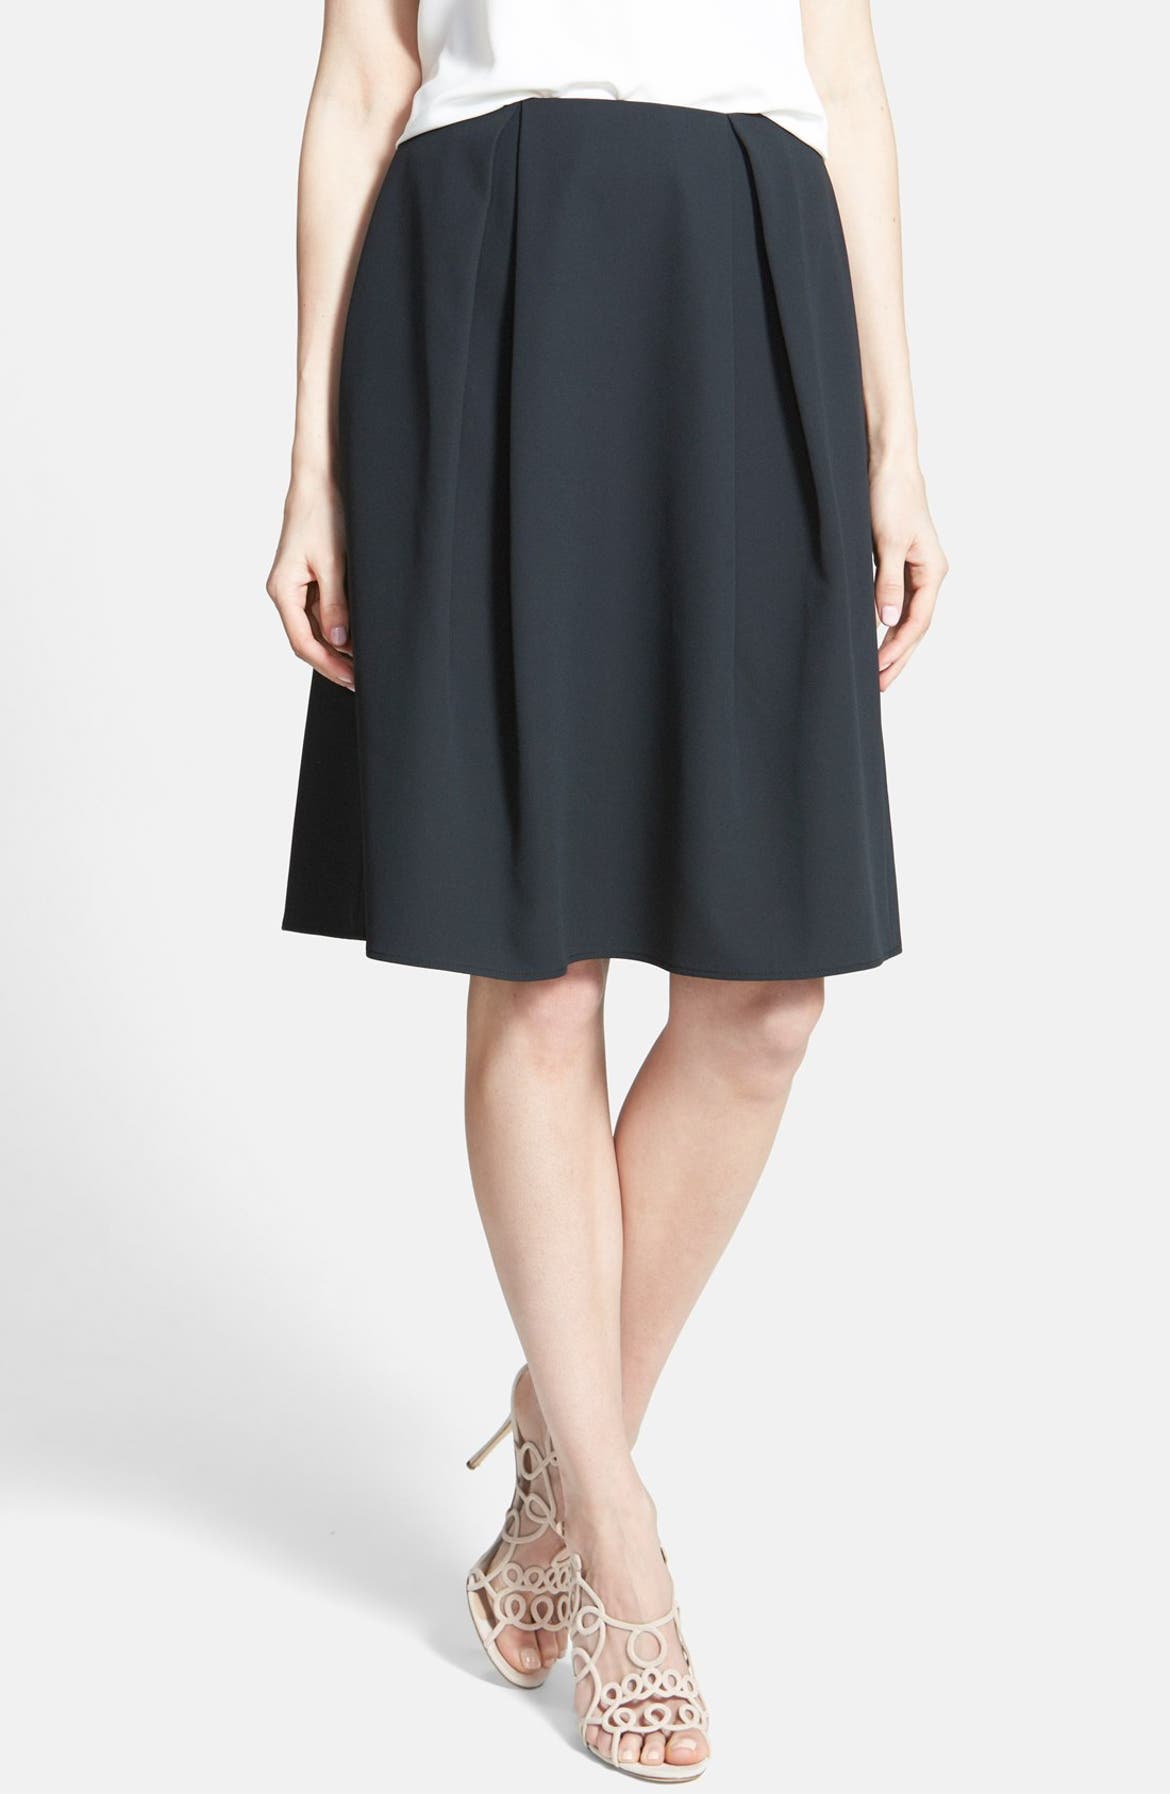 Chelsea28 Pleated A-Line Skirt | Nordstrom